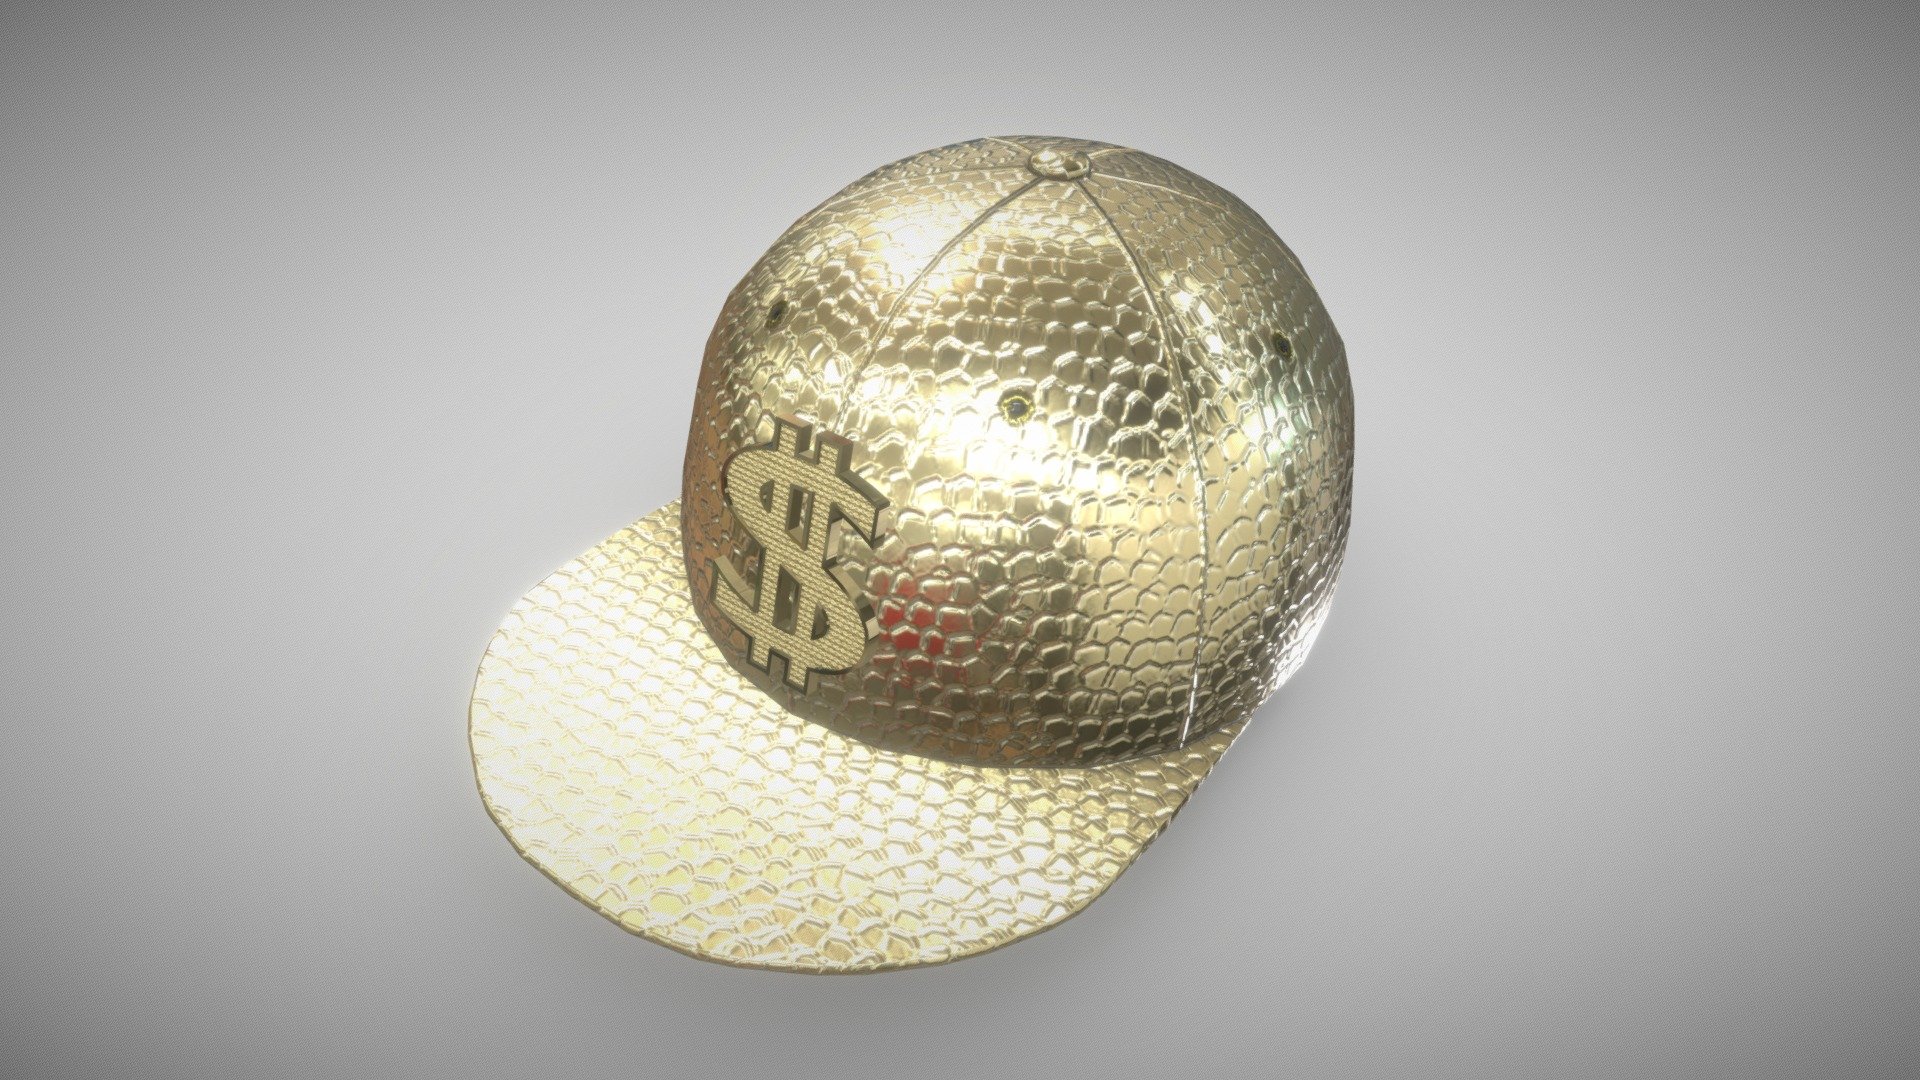 The gold snakeskin pattern and large &ldquo;$